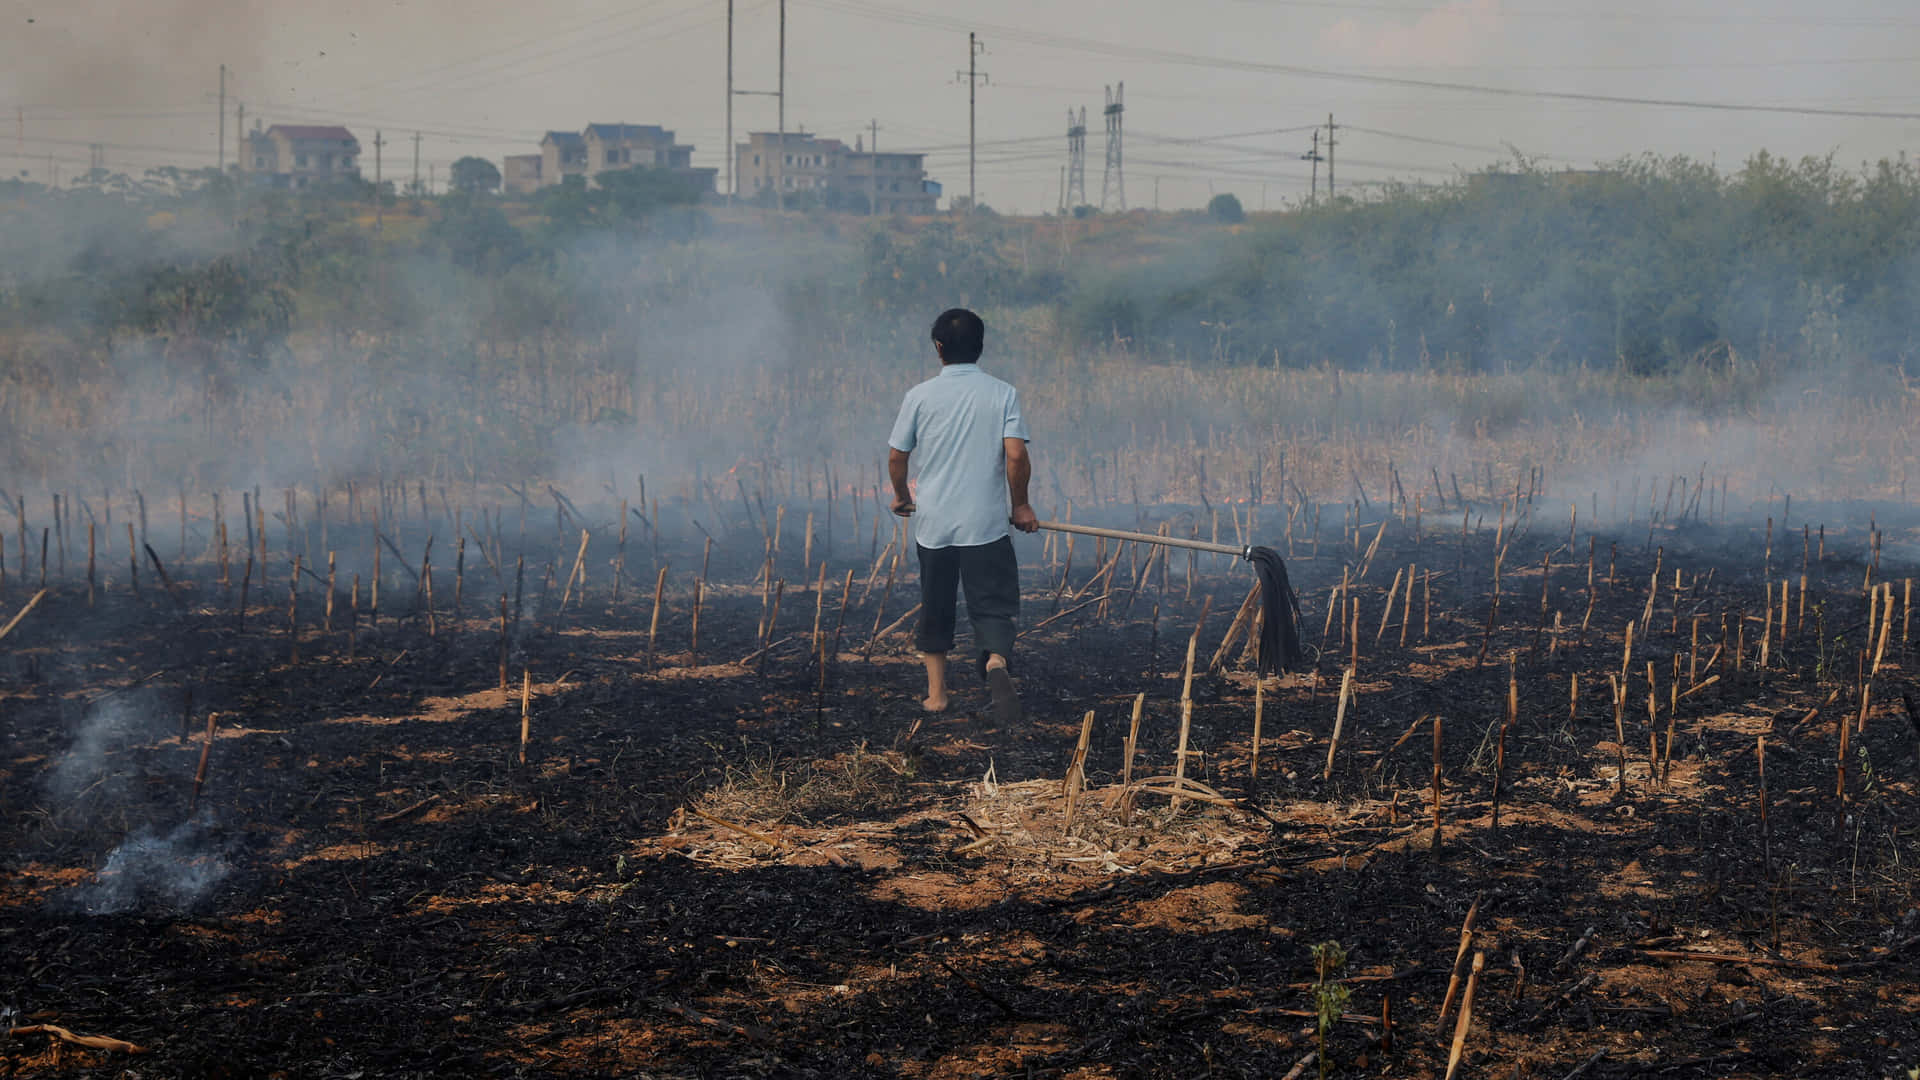 A Man Is Walking Through A Field With Smoke